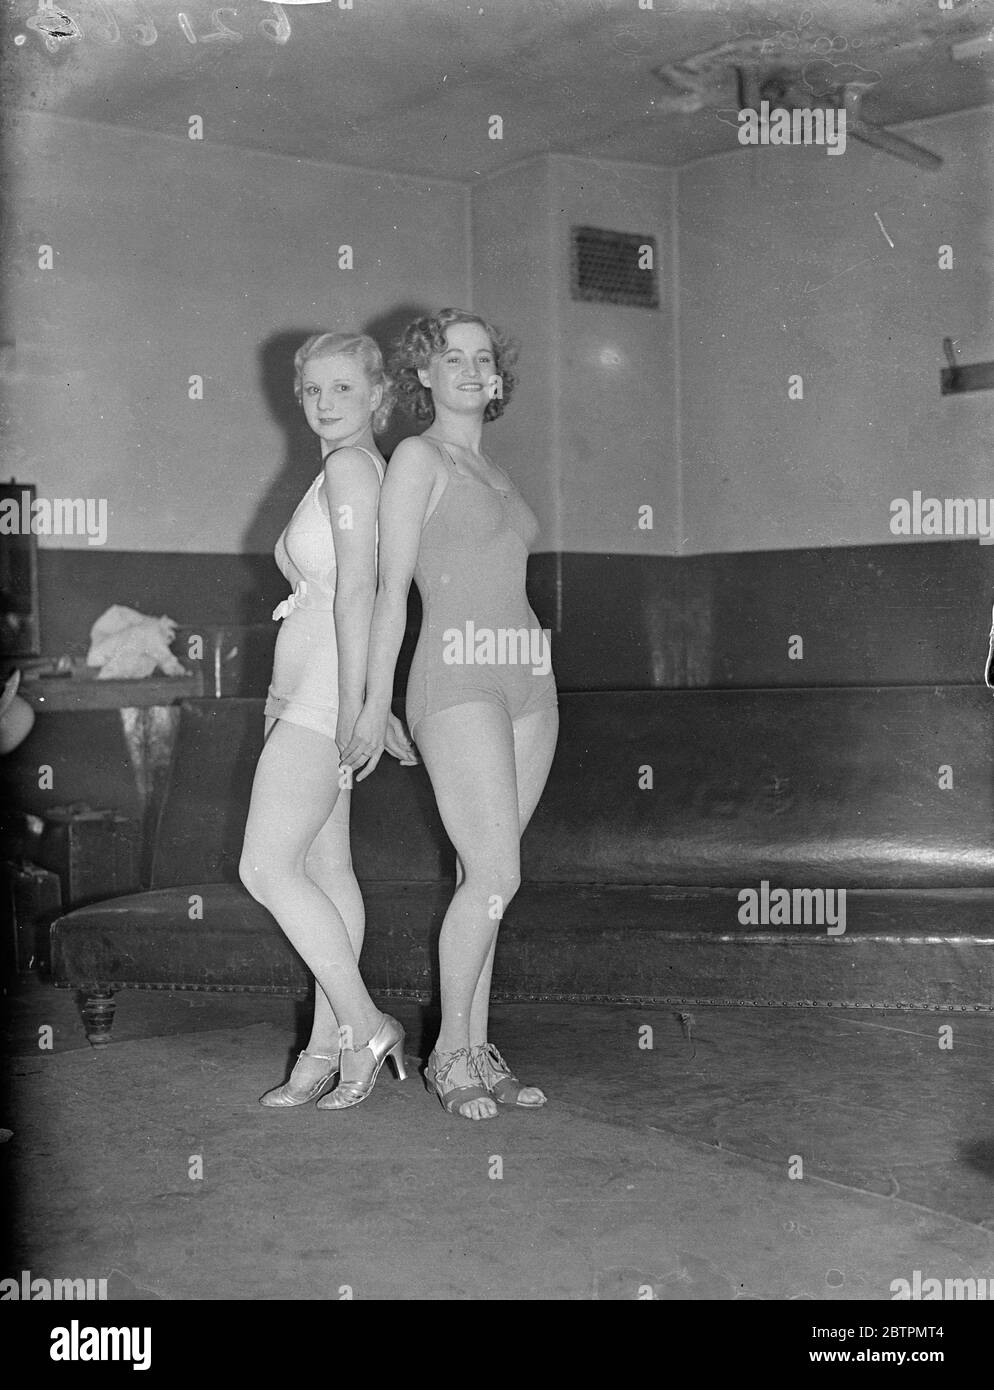 Lancashire's most beautiful twins. Daisy Robinson and Rosie Robinson, 17 1/2-year-old twins from Oldham, Lancaster, were competitors in a contest to find the girl with the perfect figure at Holborn Empire, London. Daisy carried off the first prize and Rose was fourth. Girls from all over the country competed. Photo shows: Daisy Robinson (right) and Joyce Fowler of Halifax was second. 10 March 1937 Stock Photo